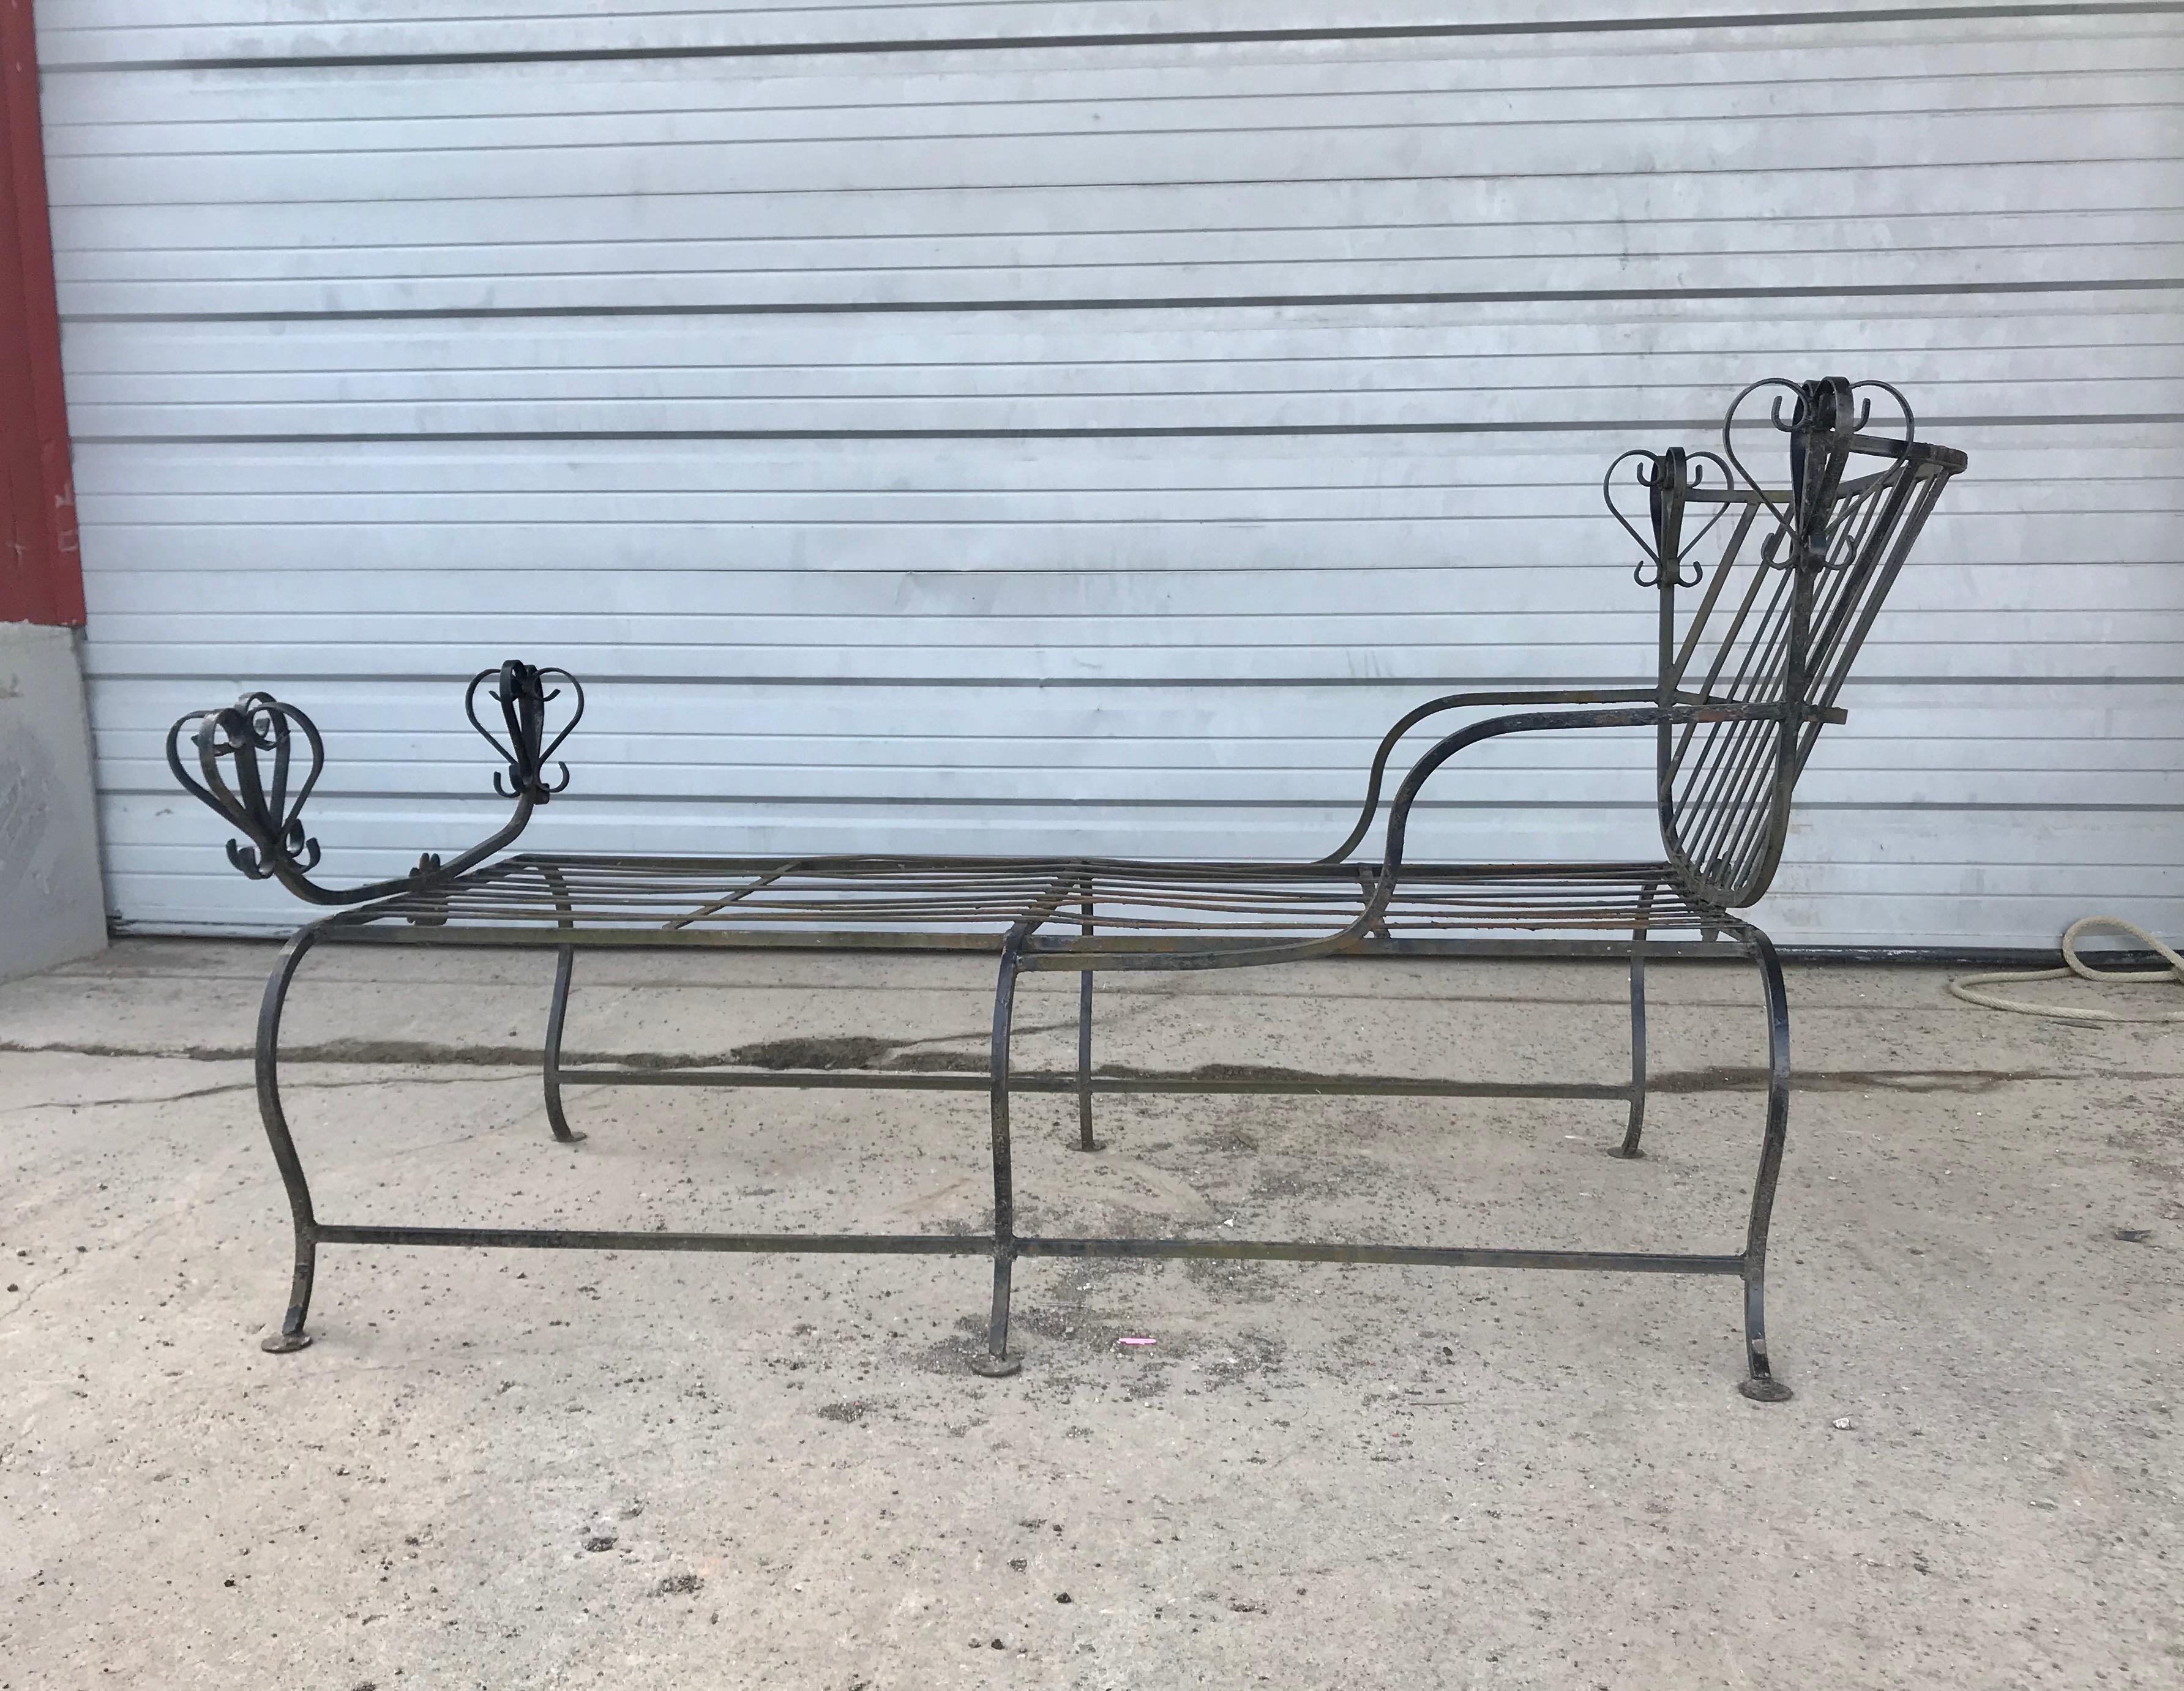 Unusual Iron Chaise Lounge ,custom made c.1950s. Savonarola Style.indoor /outdoor,, Matching chairs available ..Please check other listings,, Hand delivery avail to New York City or anywhere en route from Buffalo NY,,, mAtching chairs appearing in